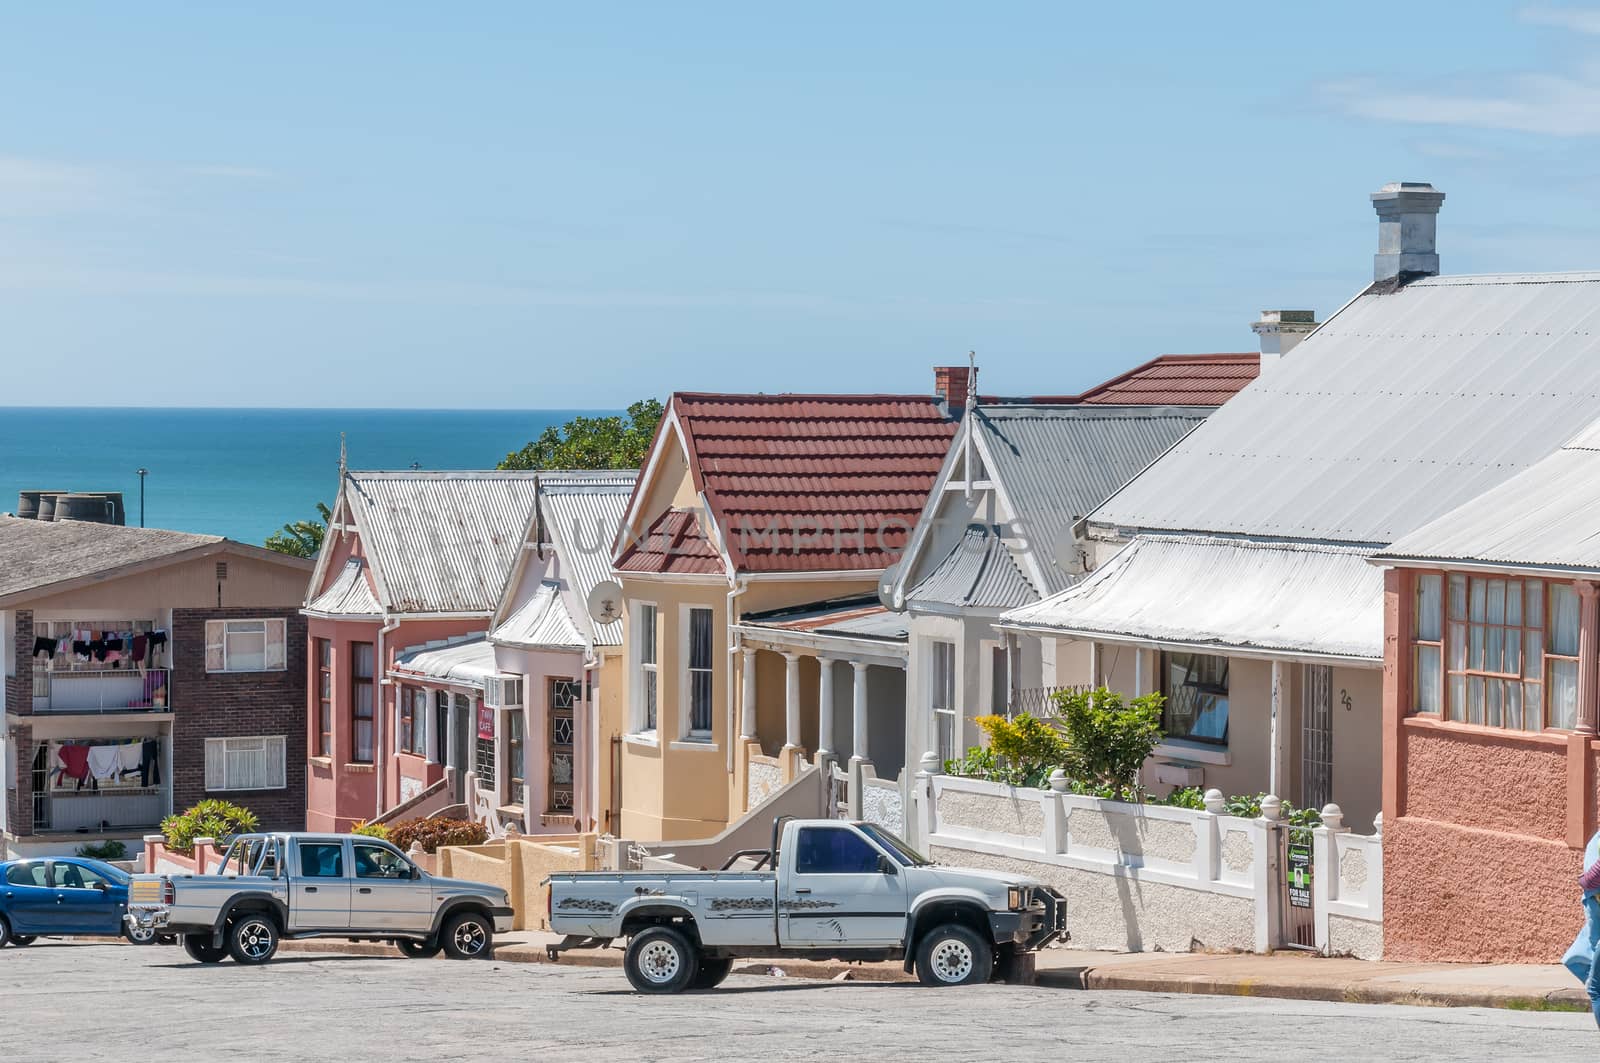 PORT ELIZABETH, SOUTH AFRICA - FEBRUARY 27, 2016: Historic old houses in North End dating from early 19th century